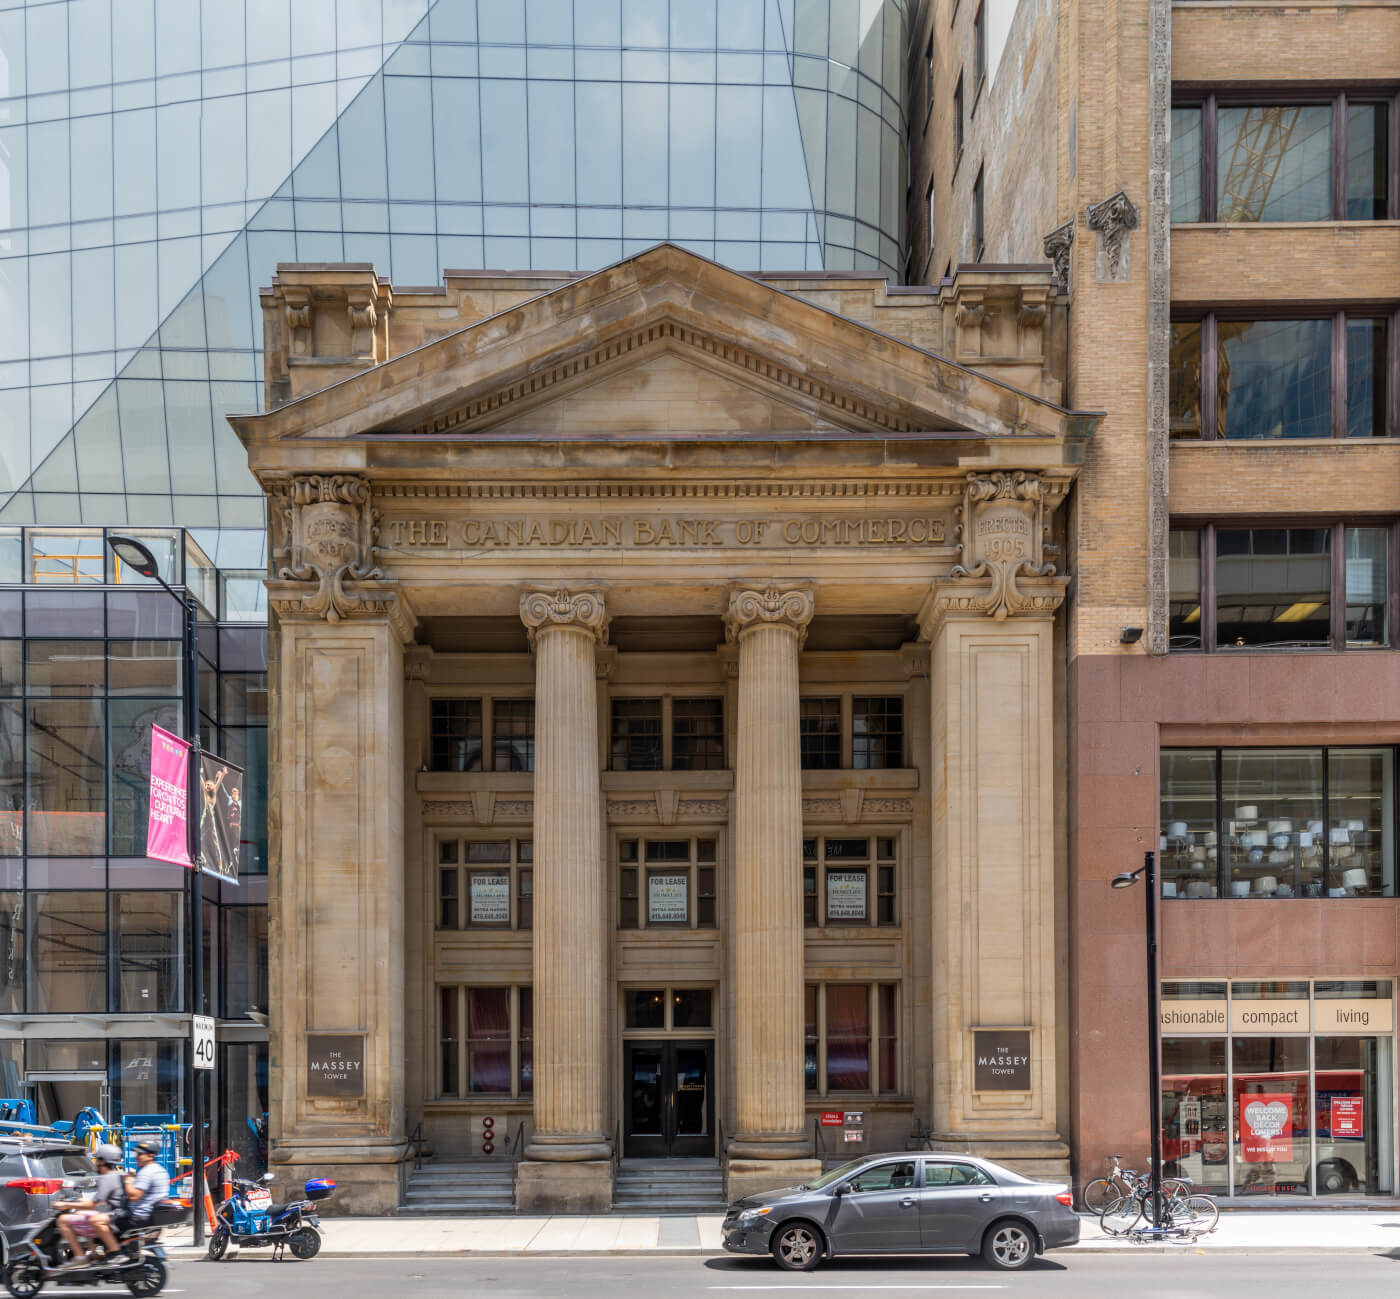 Photograph of a light coloured stone building set between modern buildings. There are two round pillars in the middle. The roof comes to a point with slightly marbled colour. Letting right below the roof reads "THE CANADIAN BANK OF COMMERCE". Below are large rectangular windows which extend to ground level. On either side of the stone building are brown plaques on the walls which read "THE / MASSEY / TOWER".